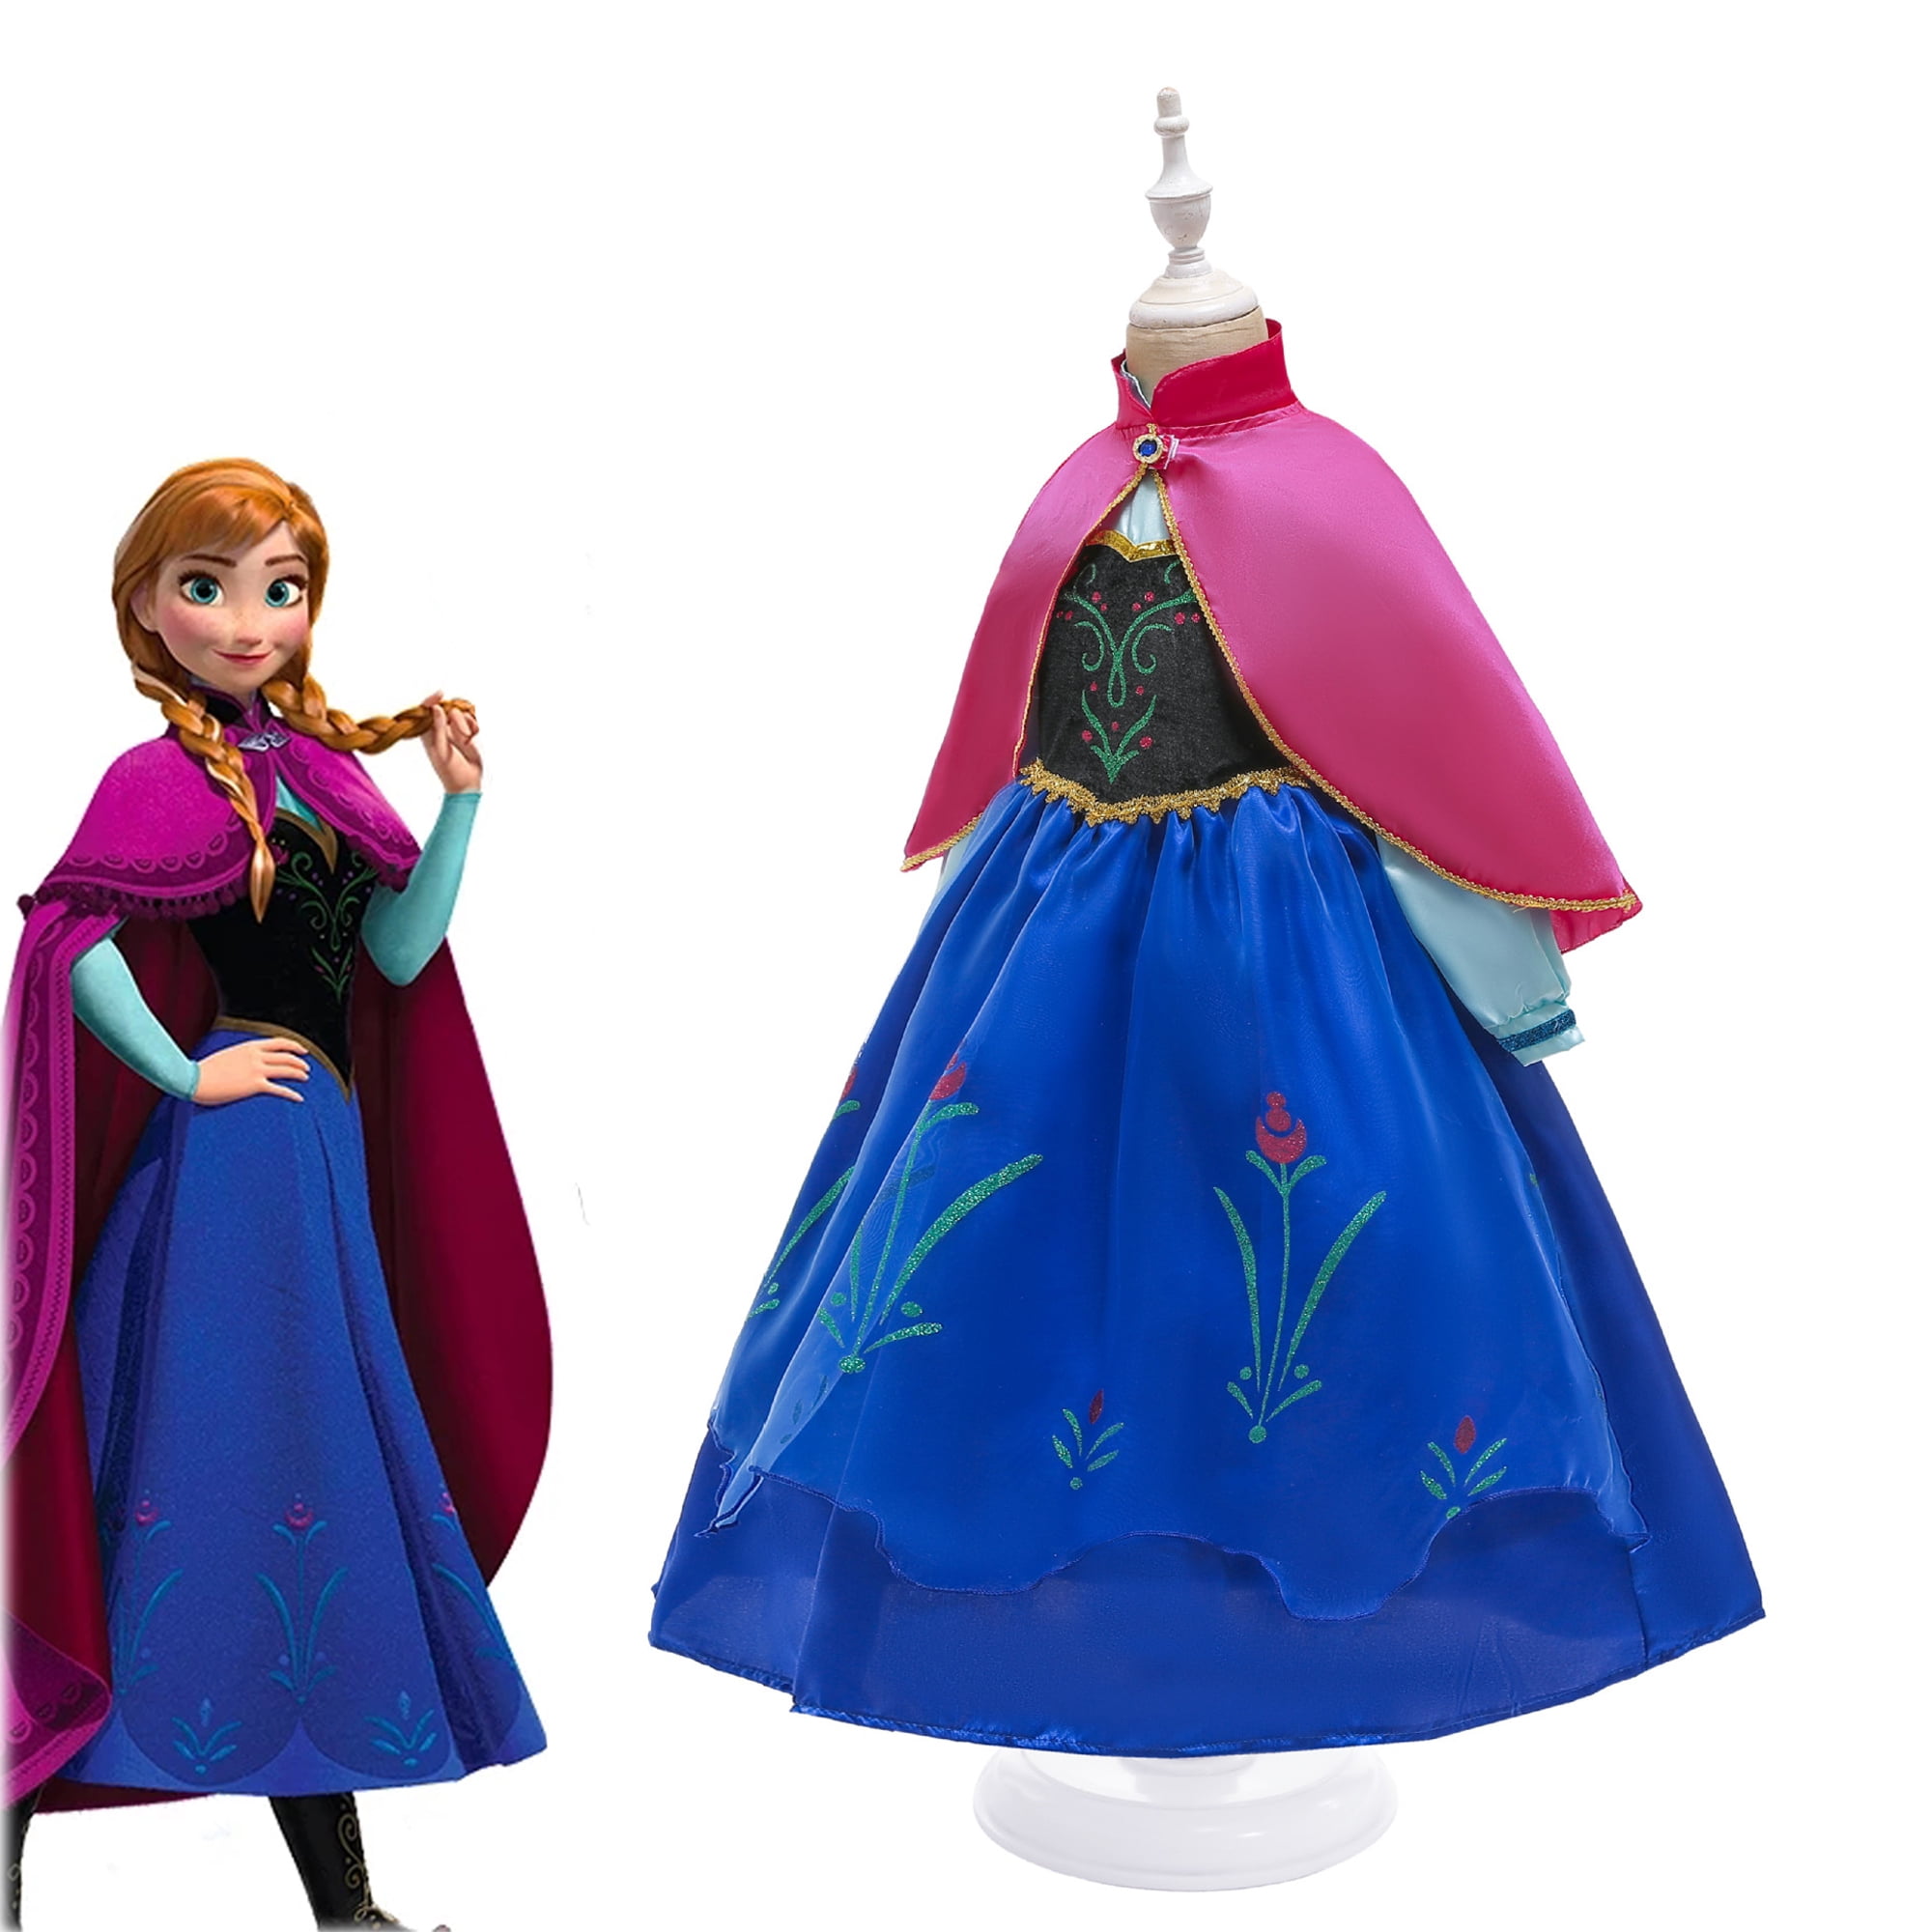 Anna Elsa Dress Girl Princess Costume Snow Carnival Costumes Kids Party Clothing 